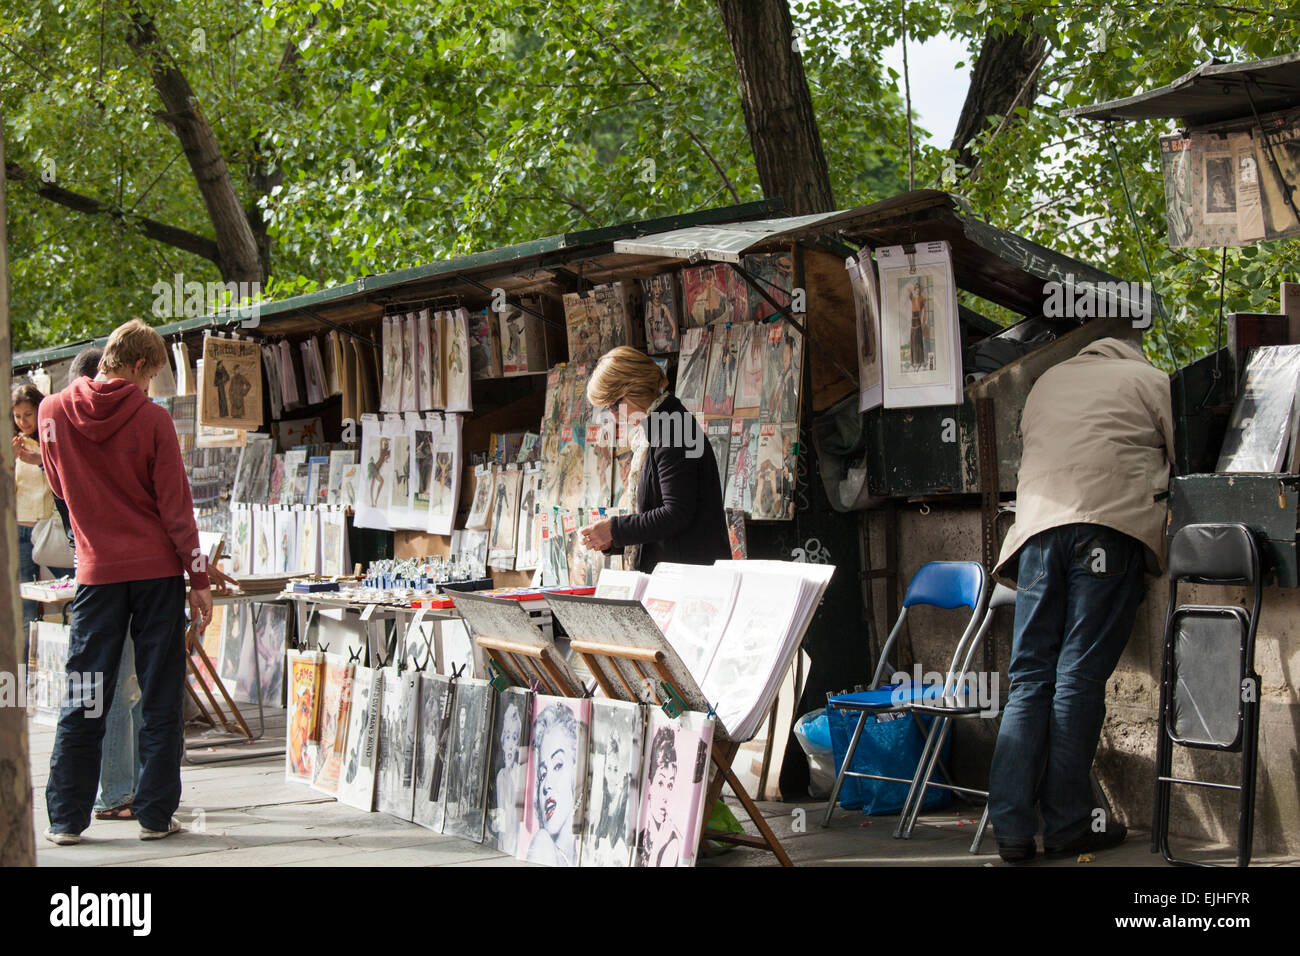 Bookseller stalls by the Seine, Paris, France Stock Photo